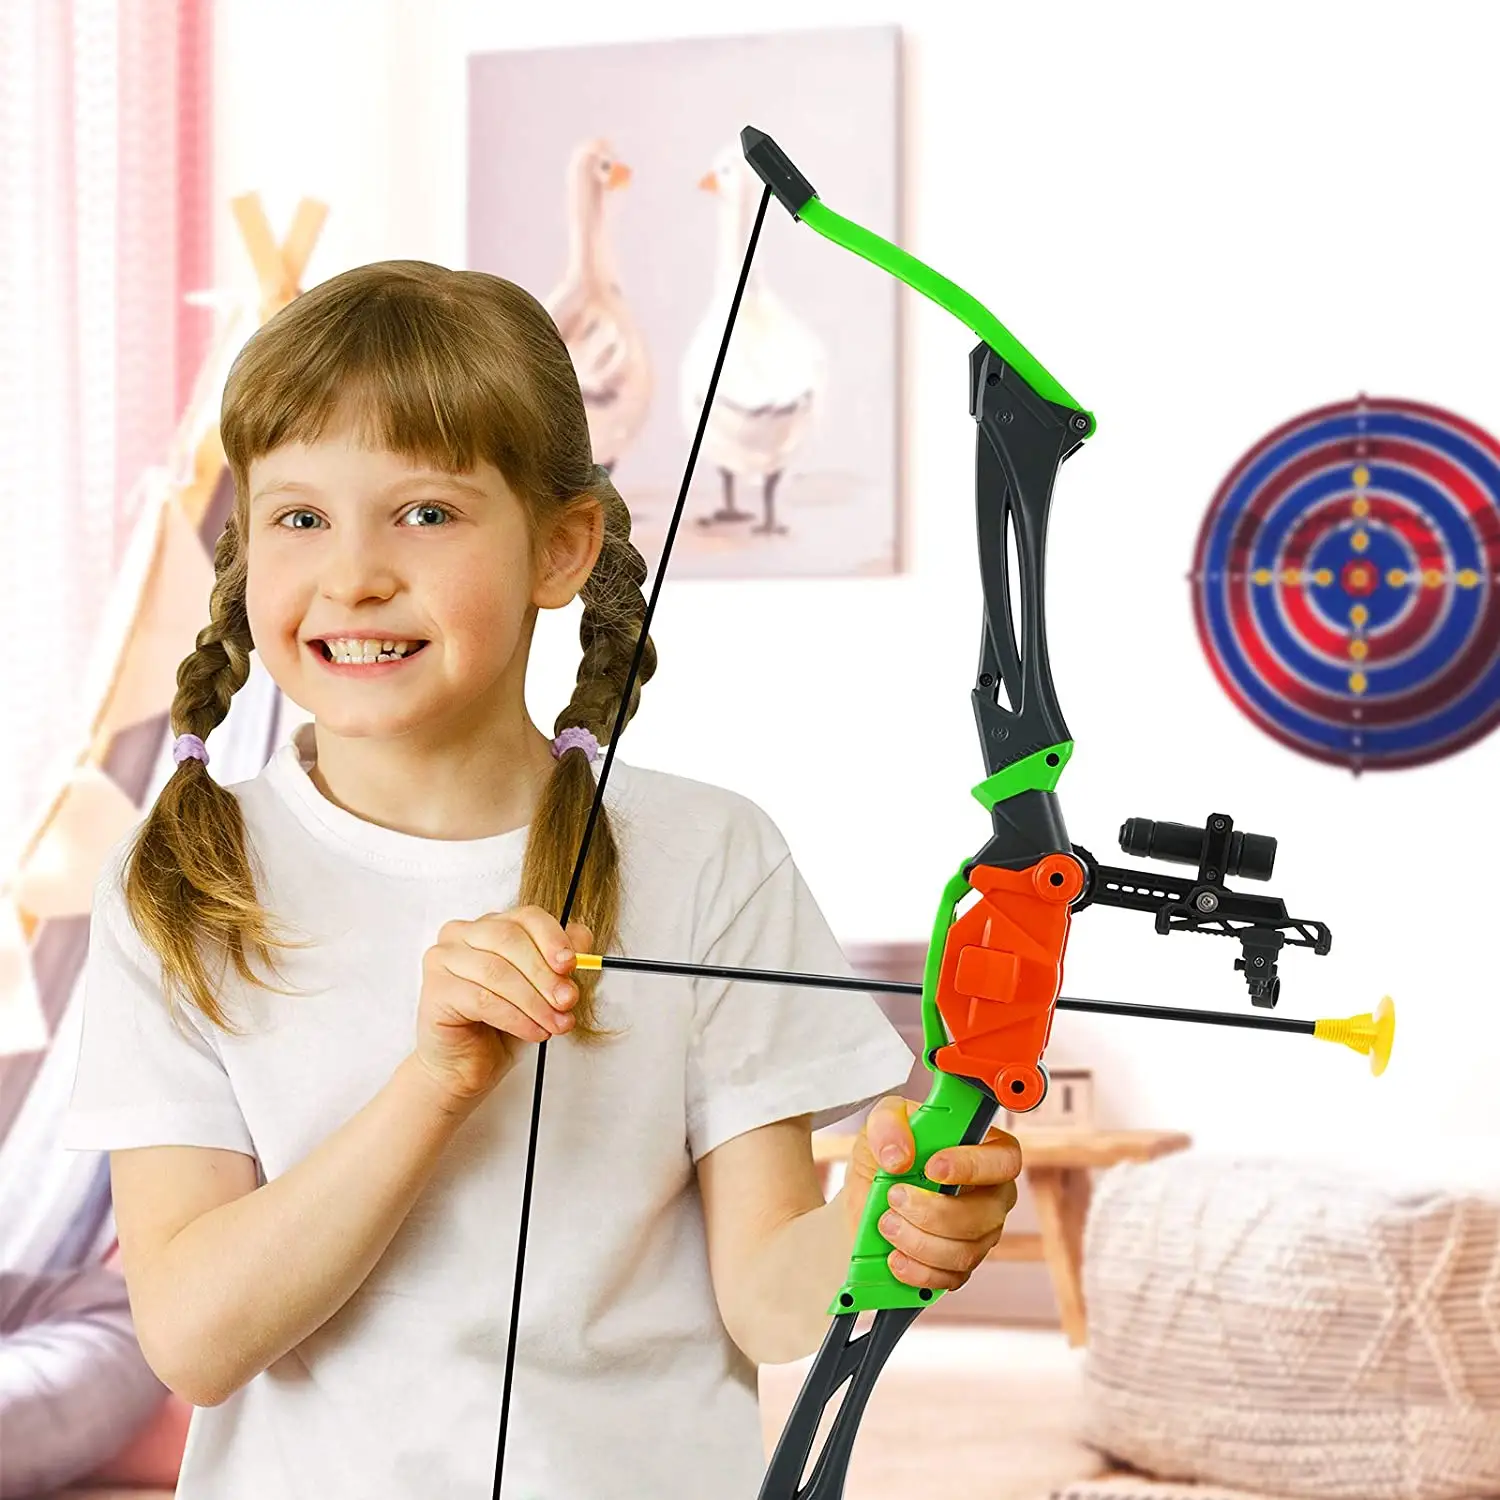 CPC Children's Luminous Archery Shooting Target Game Outdoor Sports Recurve Plastic Toy Bow and Arrow for Kids